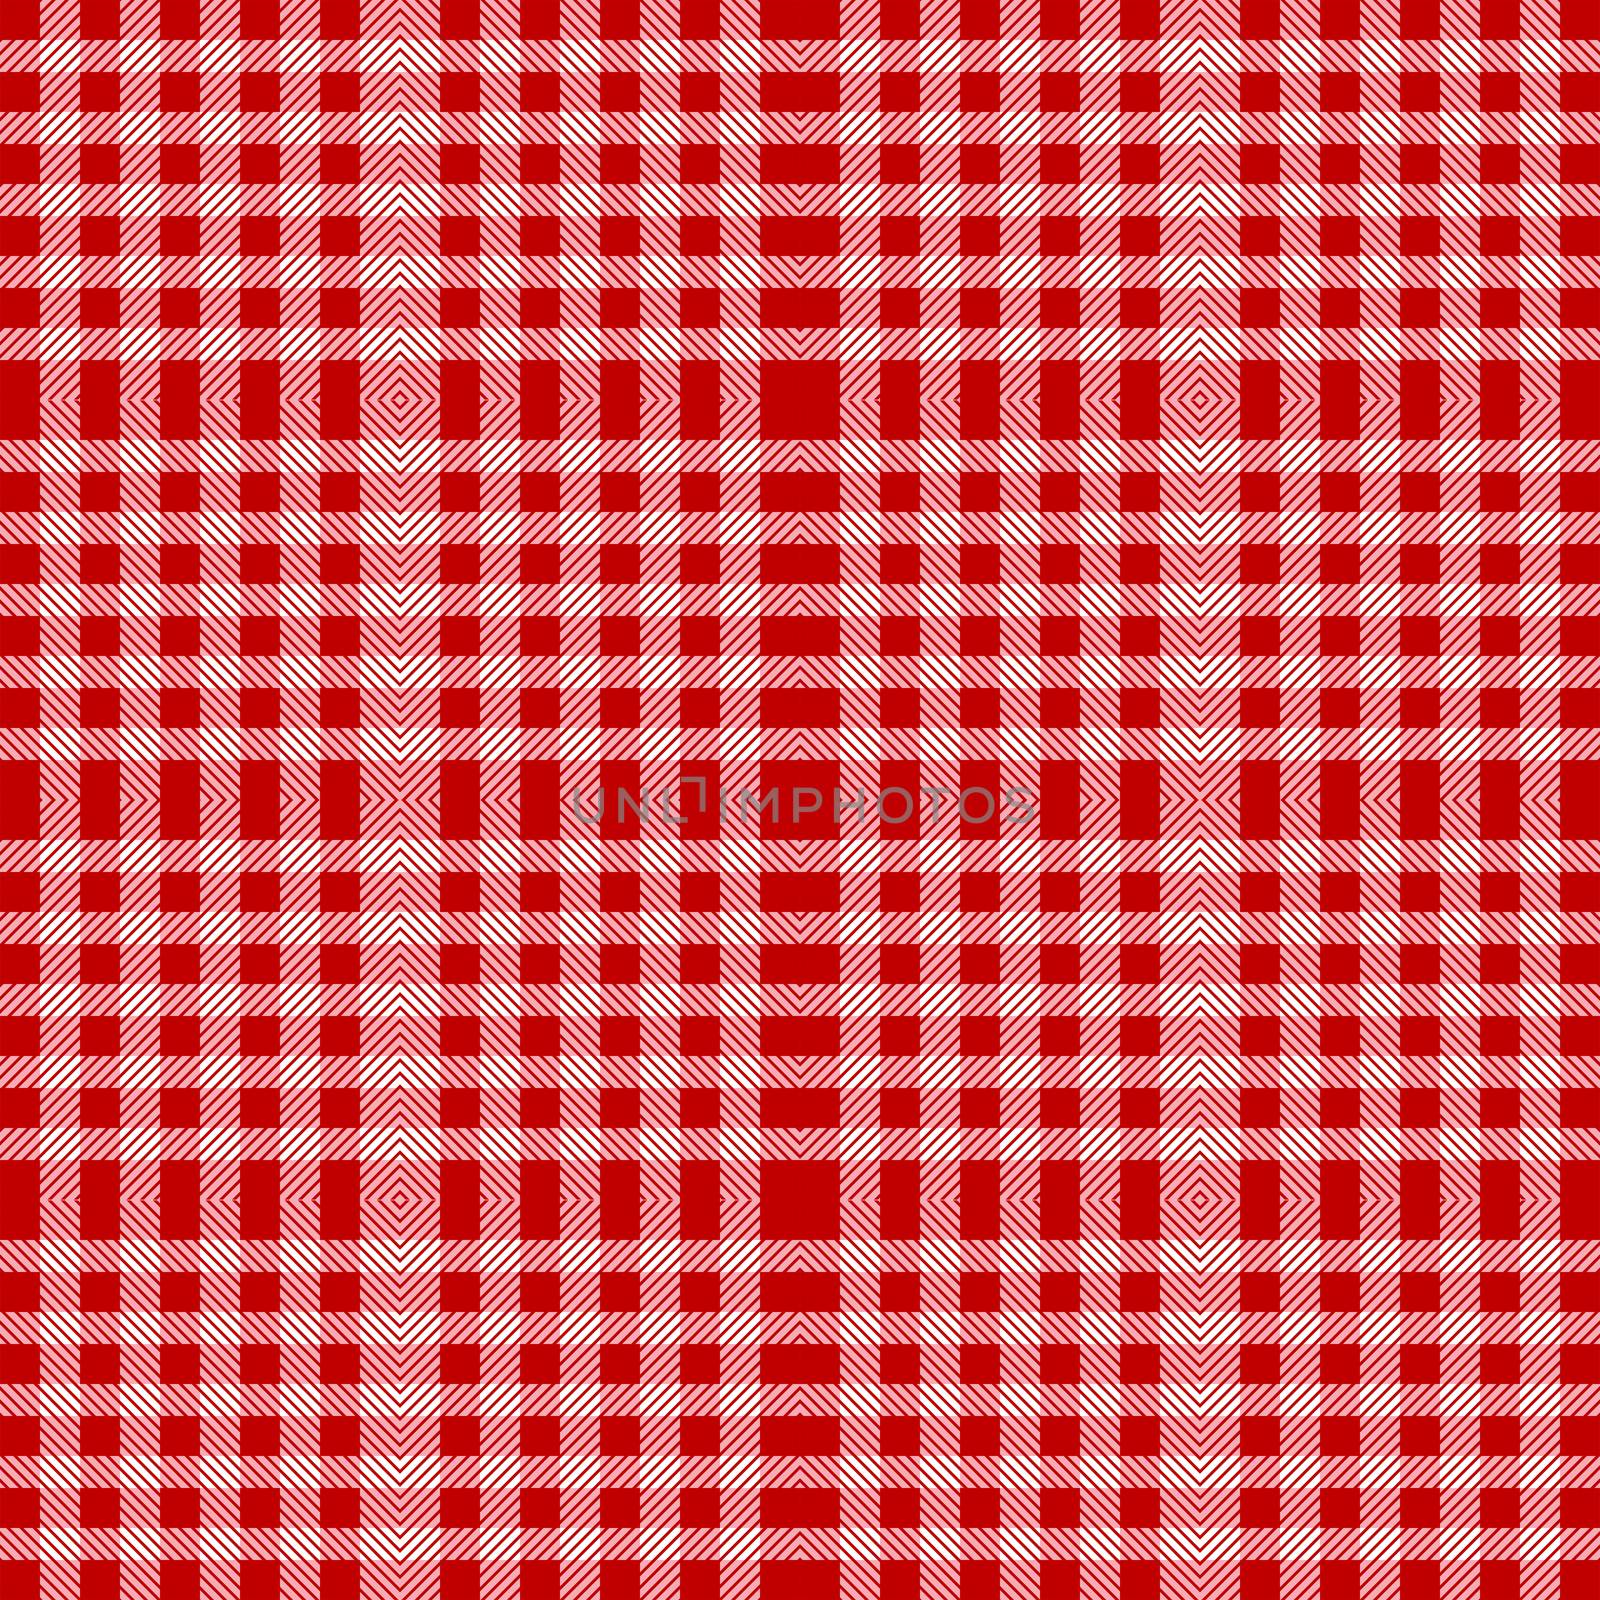 Red tablecloth texture seamless pattern by hibrida13